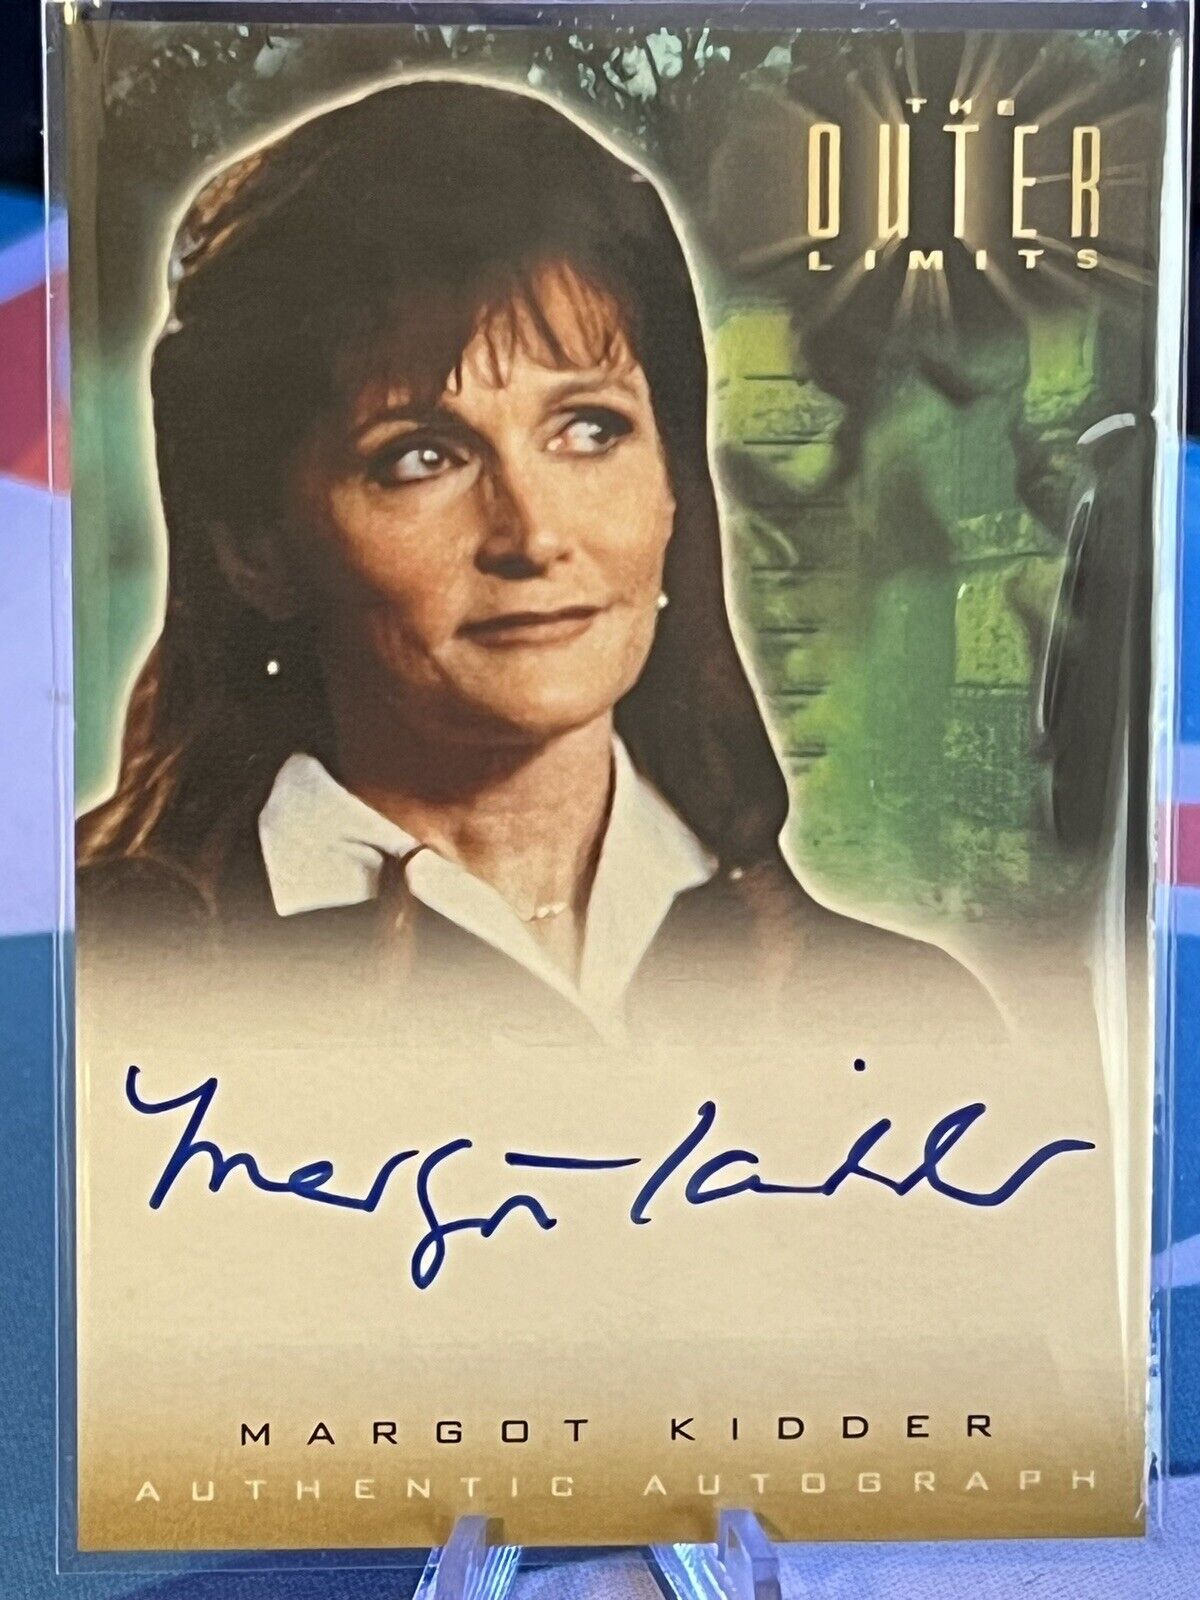 The Outer Limits Margot Kidder as Serena Autograph Card